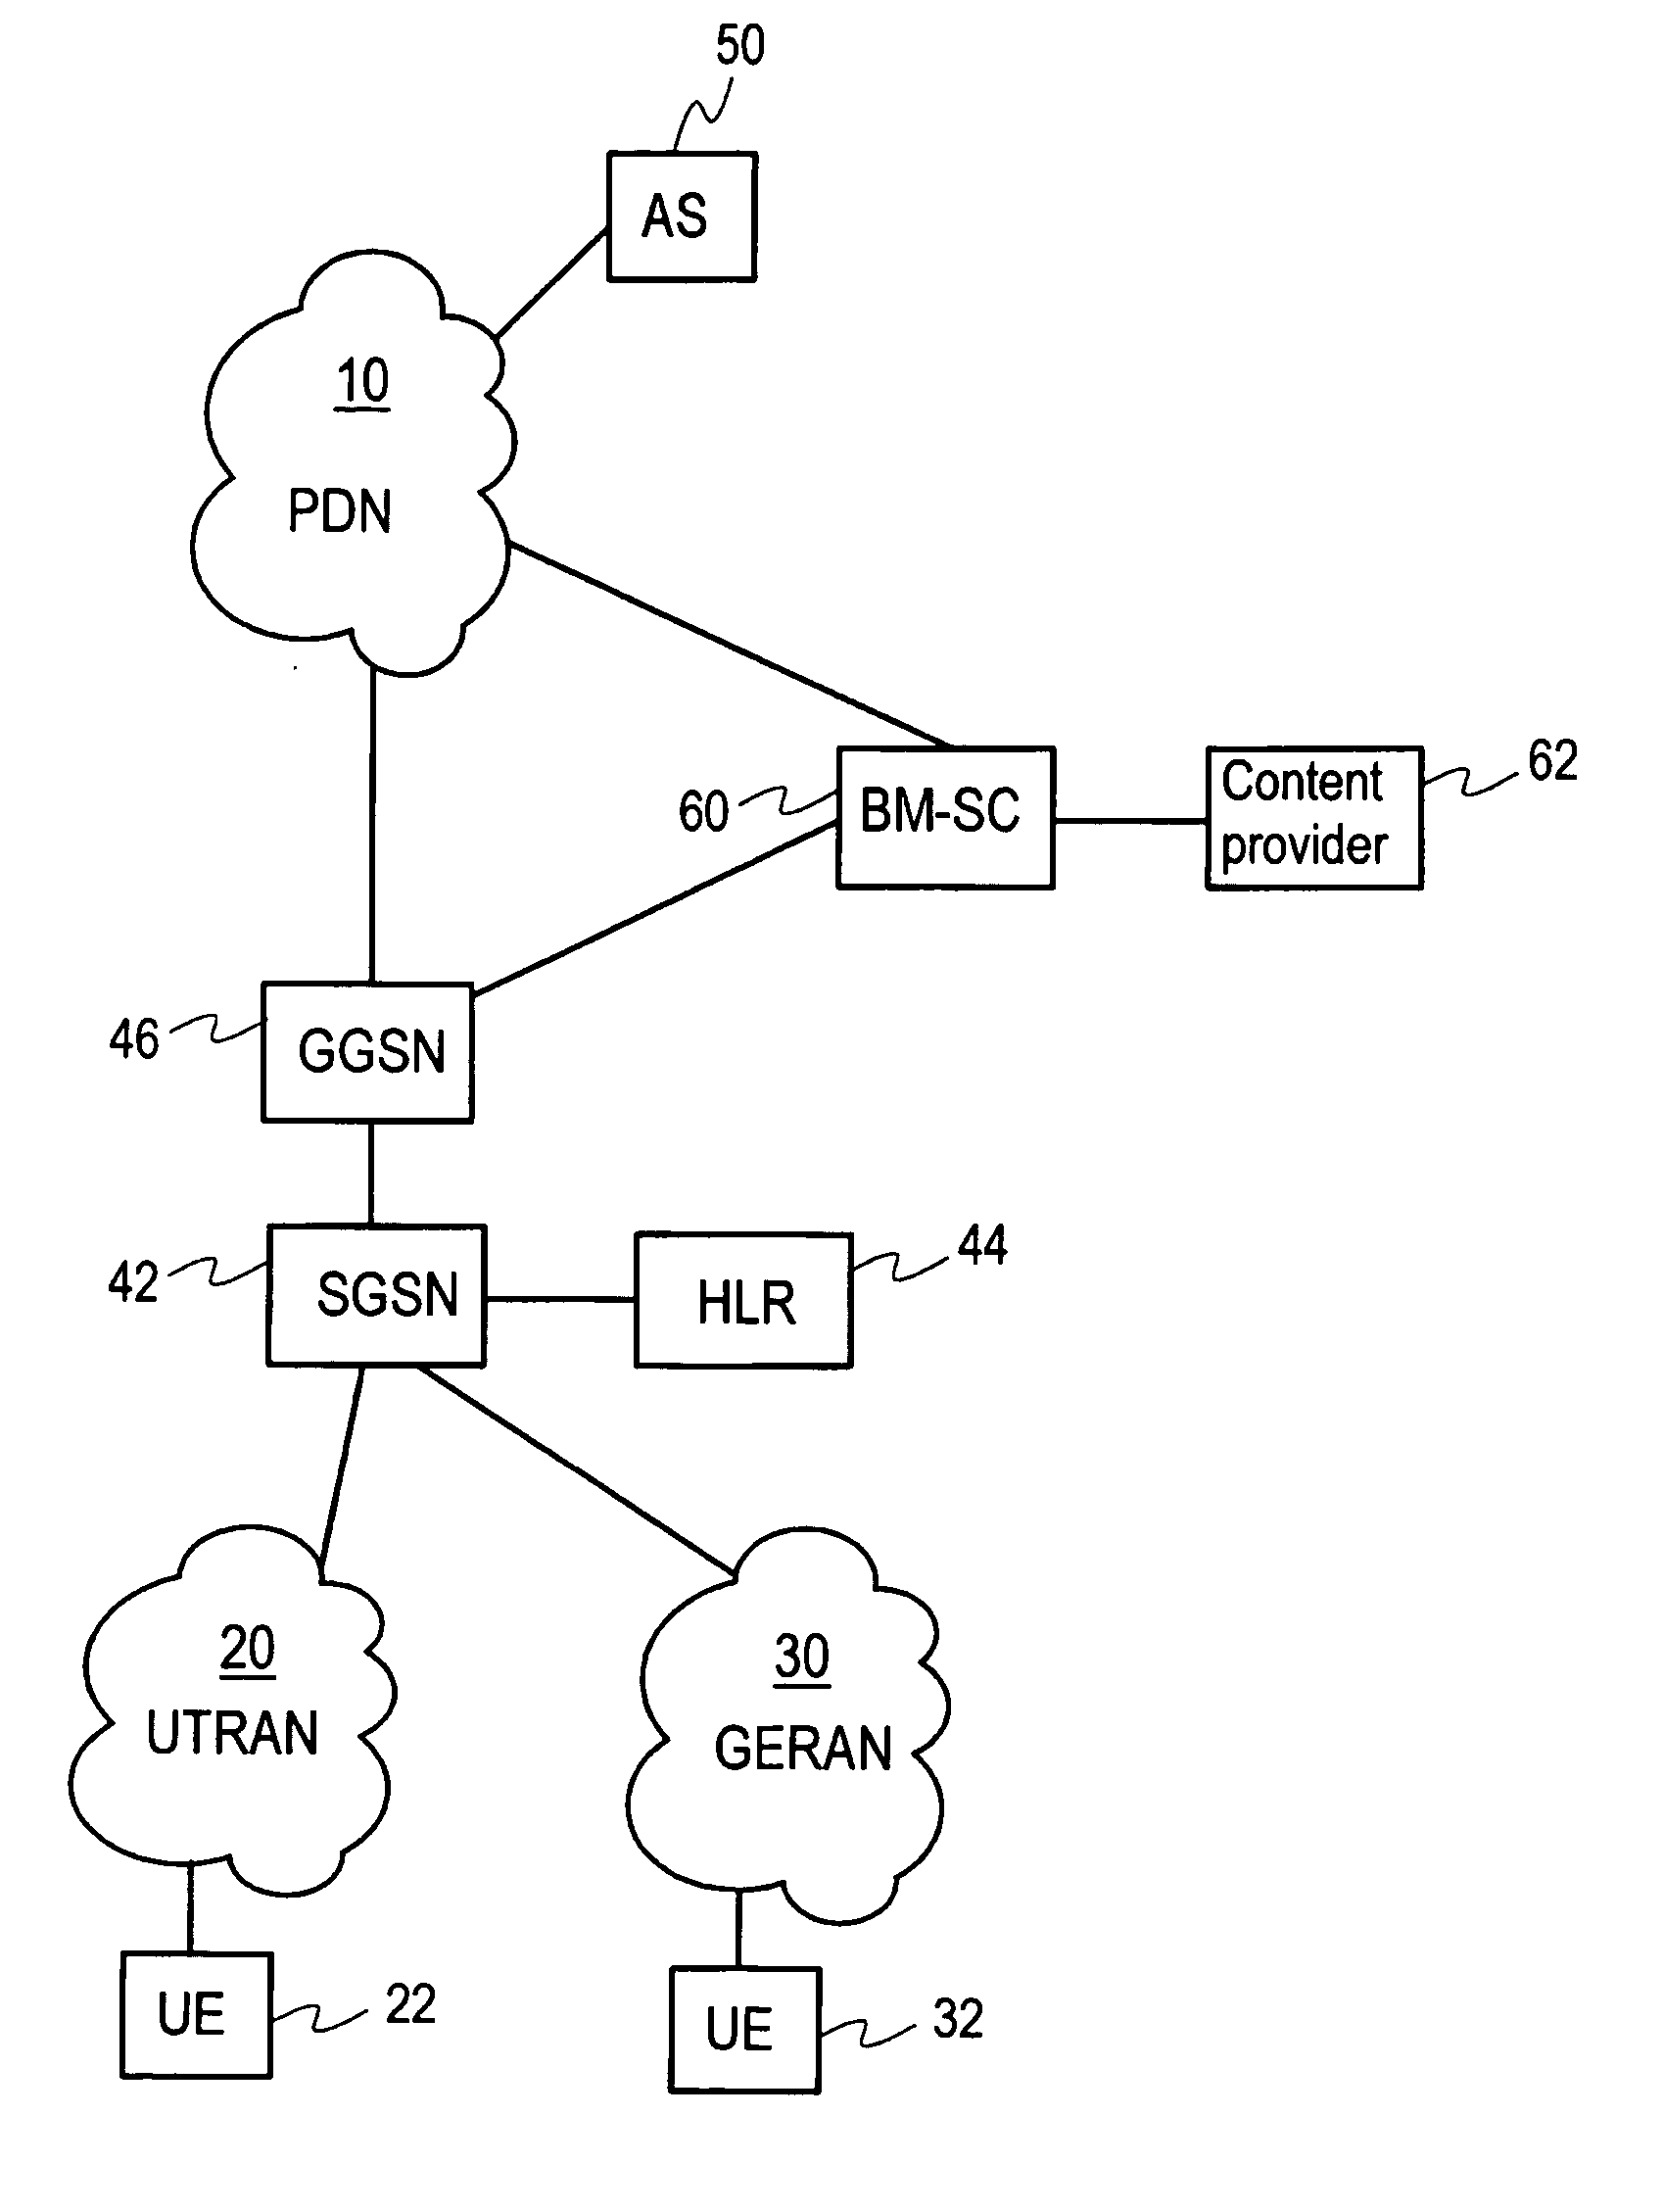 Transmitting data to a group of receiving devices